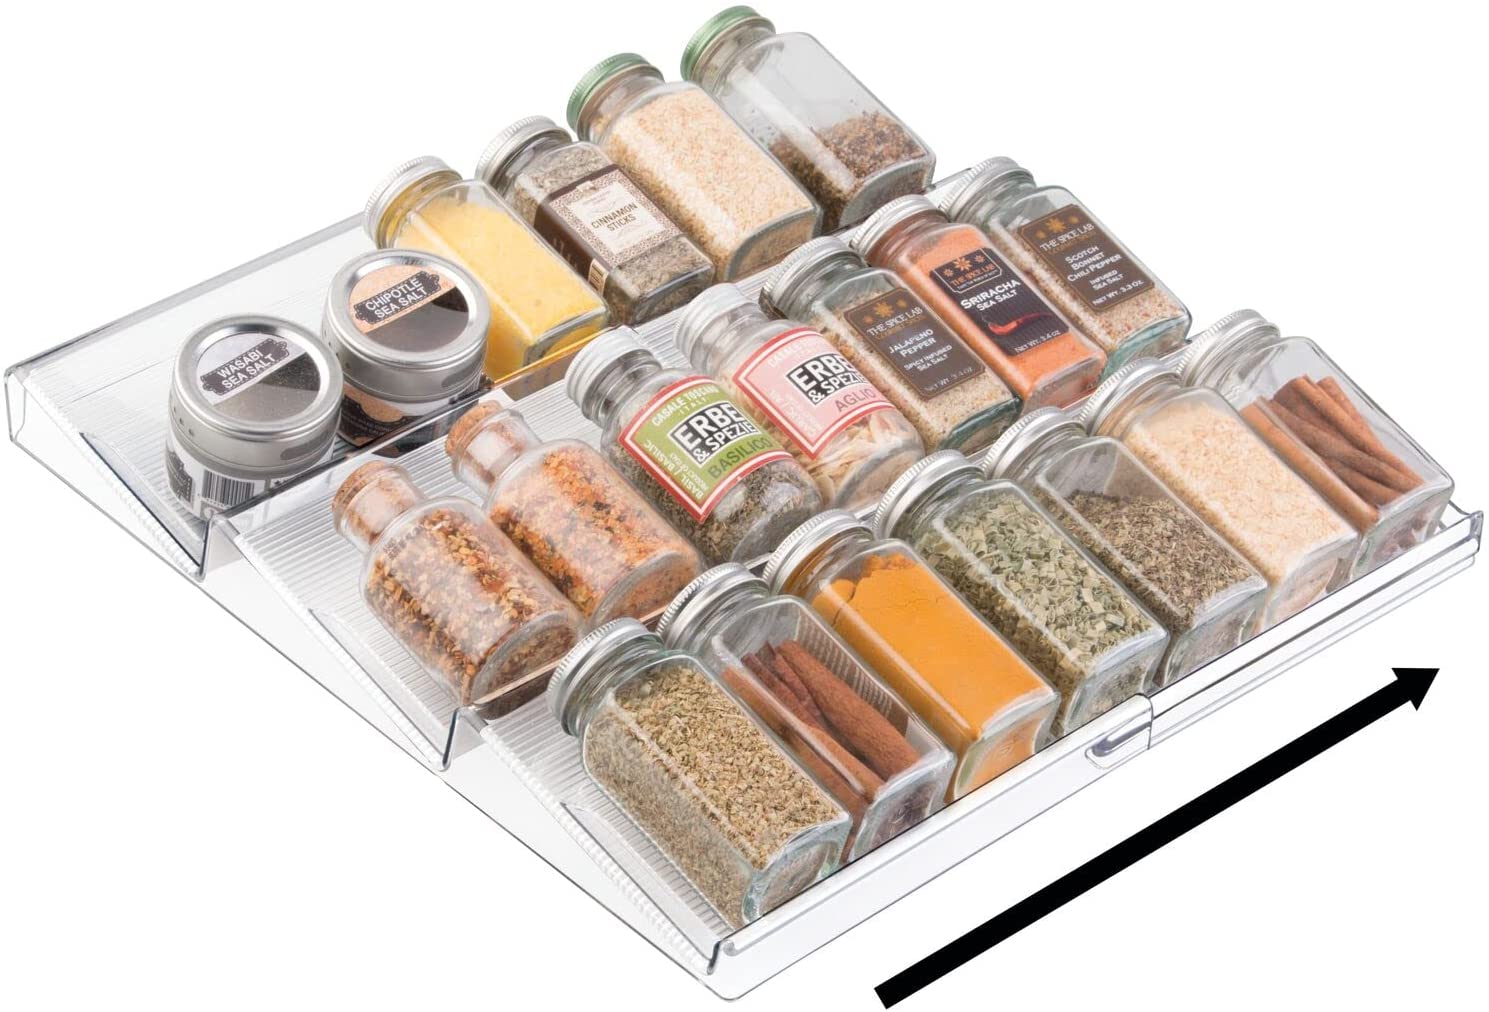 mDesign Pull Out 3-Tier Spice Organiser for Stress-Free Kitchen Clutter Control - Transparent Storage for Spice Jars and Packets 4